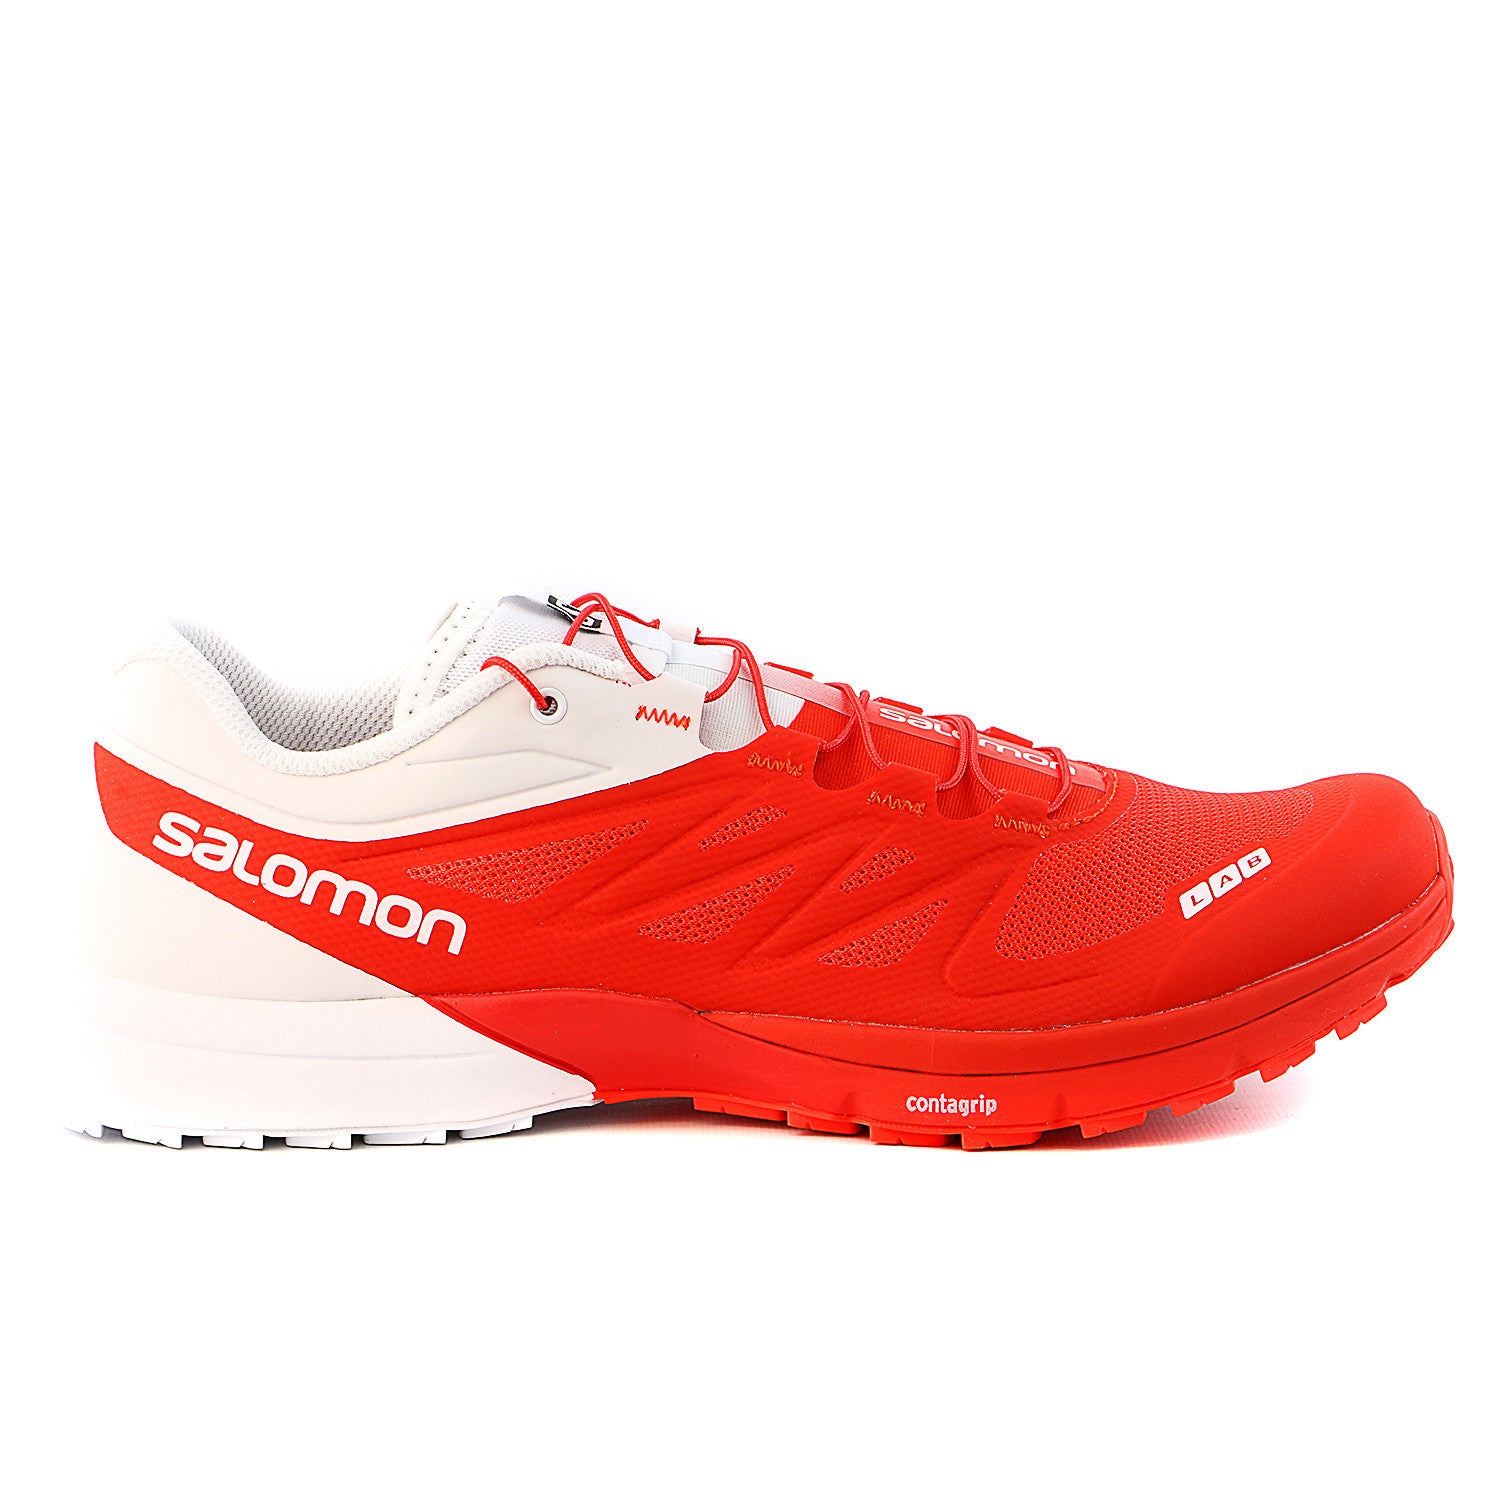 Salomon 4 Ultra Trail Running Shoes Racing Red White - M - Shoplifestyle